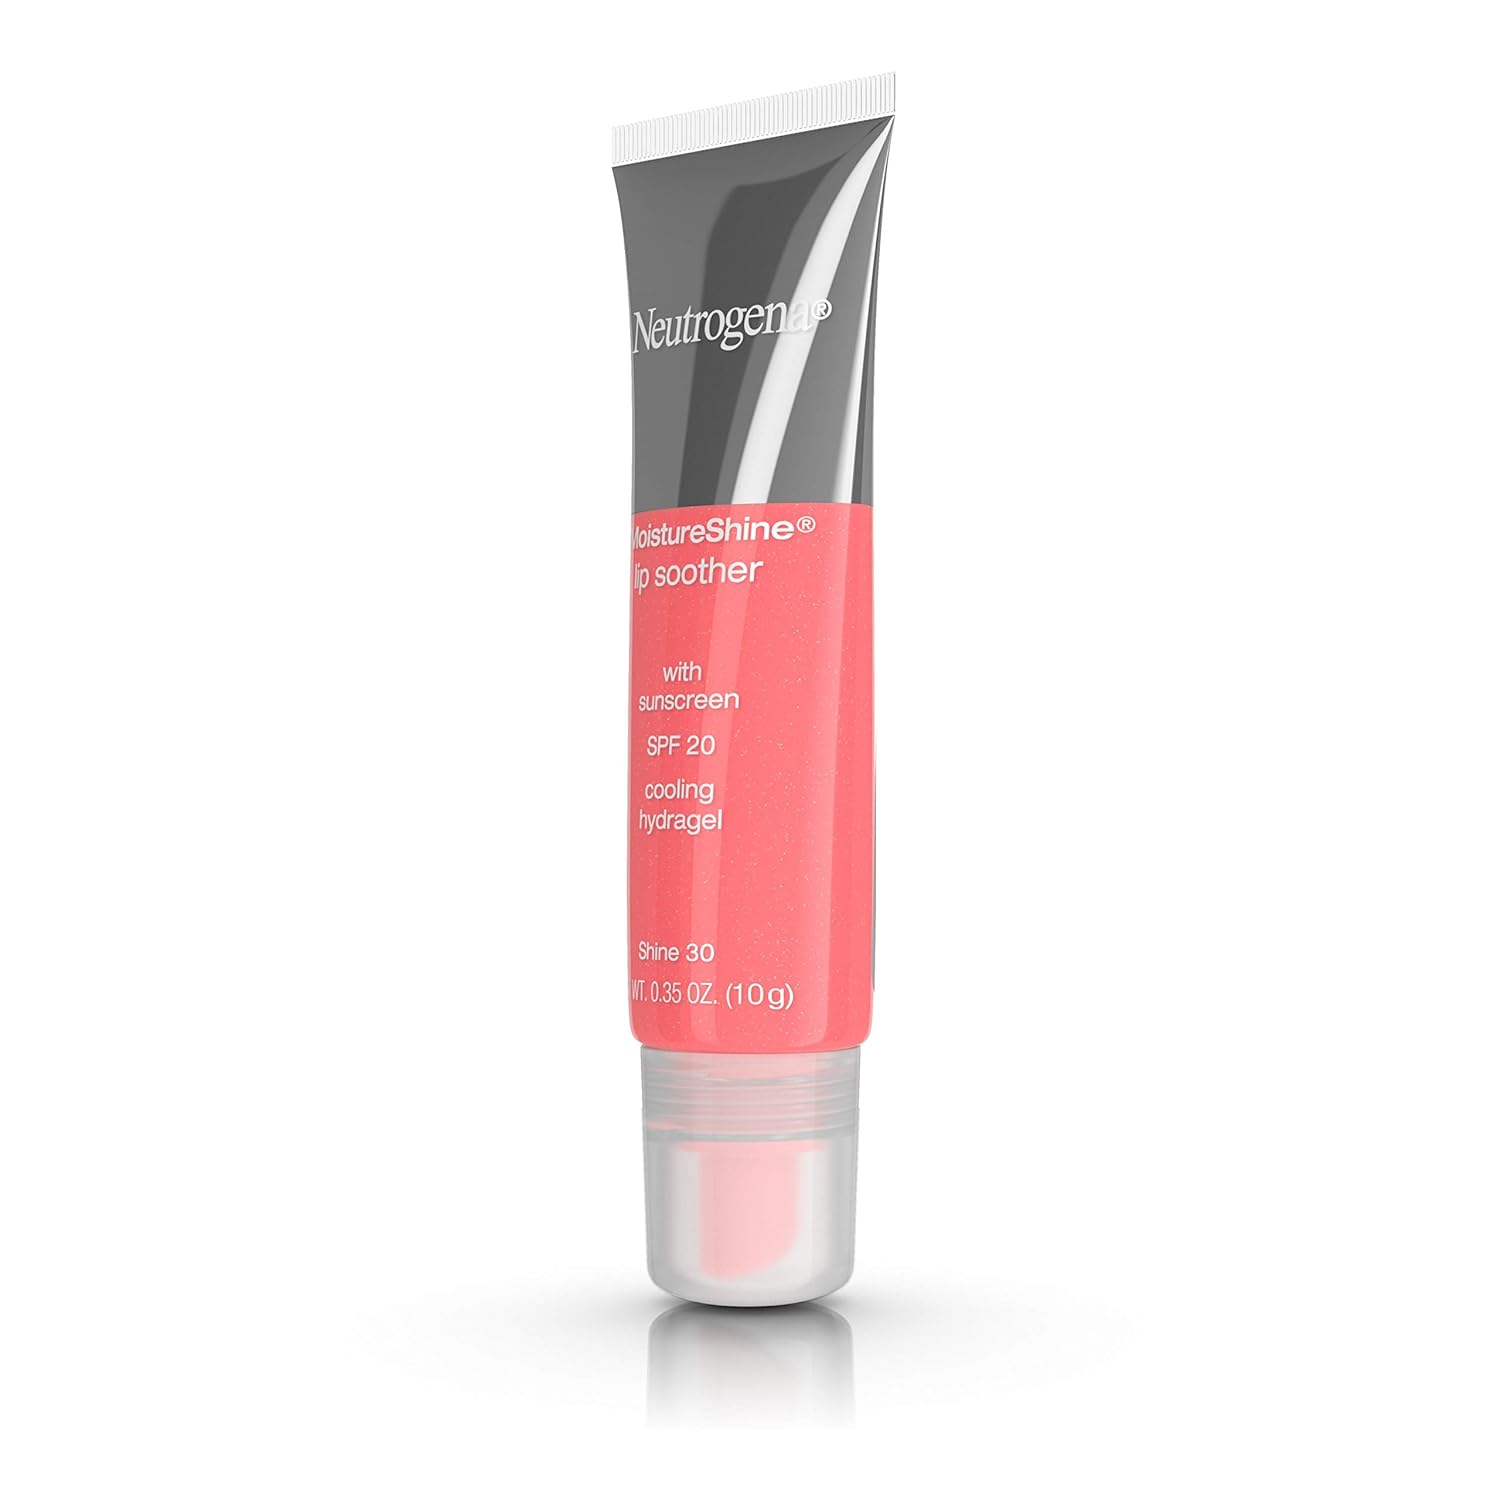 Neutrogena MoistureShine Lip Soother Gloss with SPF 20 Sun Protection, High Gloss Tinted Lip Moisturizer with Hydrating Glycerin and Soothing Cucumber for Dry Lips, Shine 30,.35 oz : Beauty & Personal Care